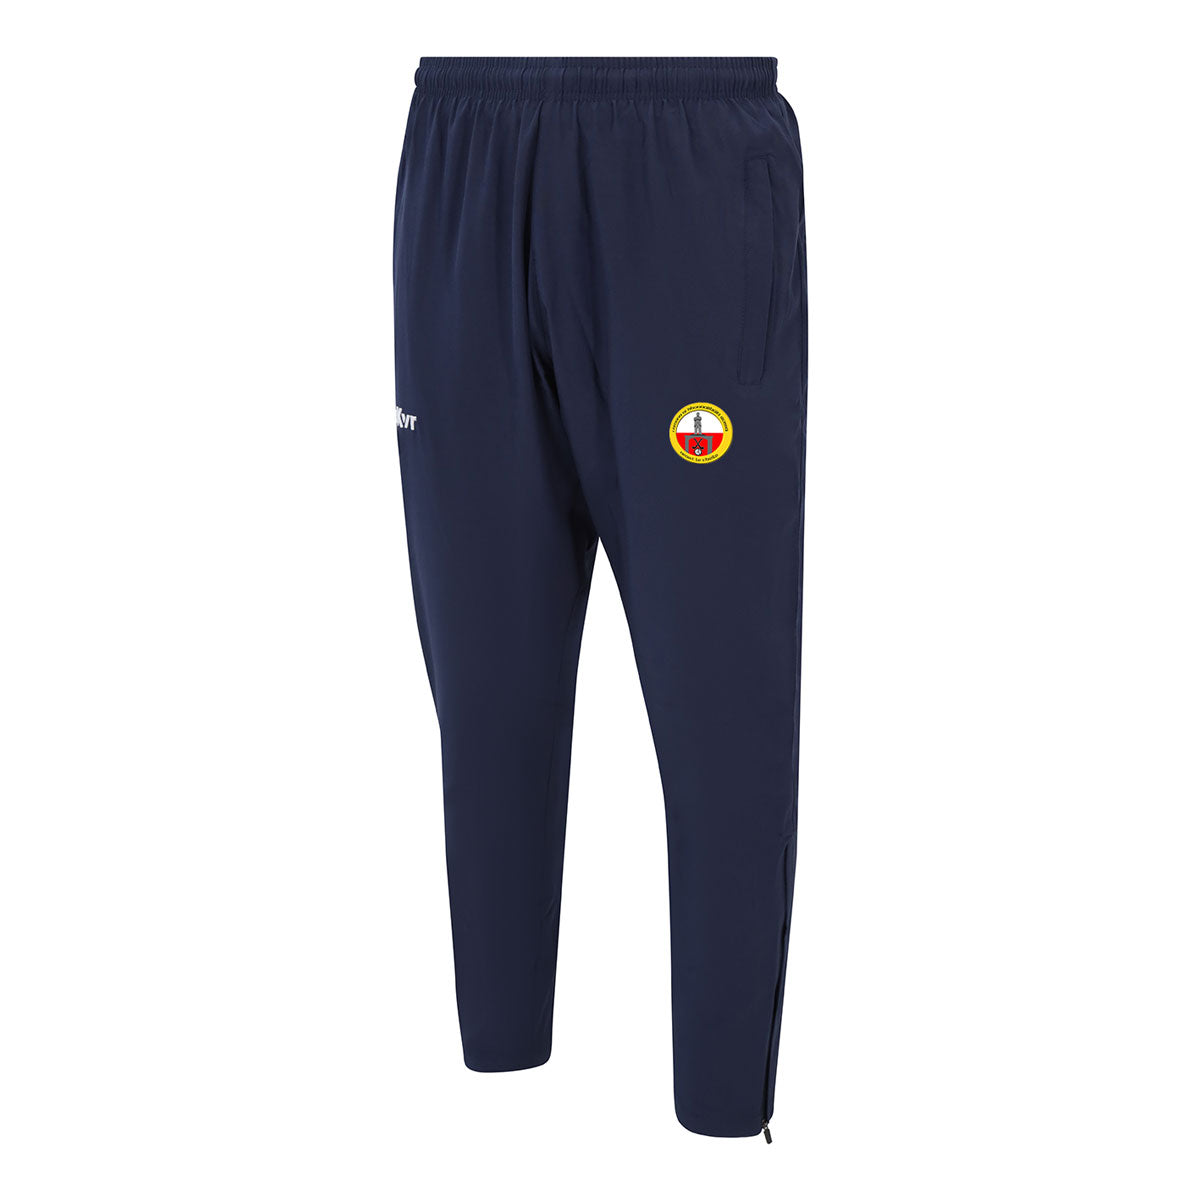 Mc Keever O'Donovan Rossa GAA Core 22 Tapered Pants - Adult - Navy